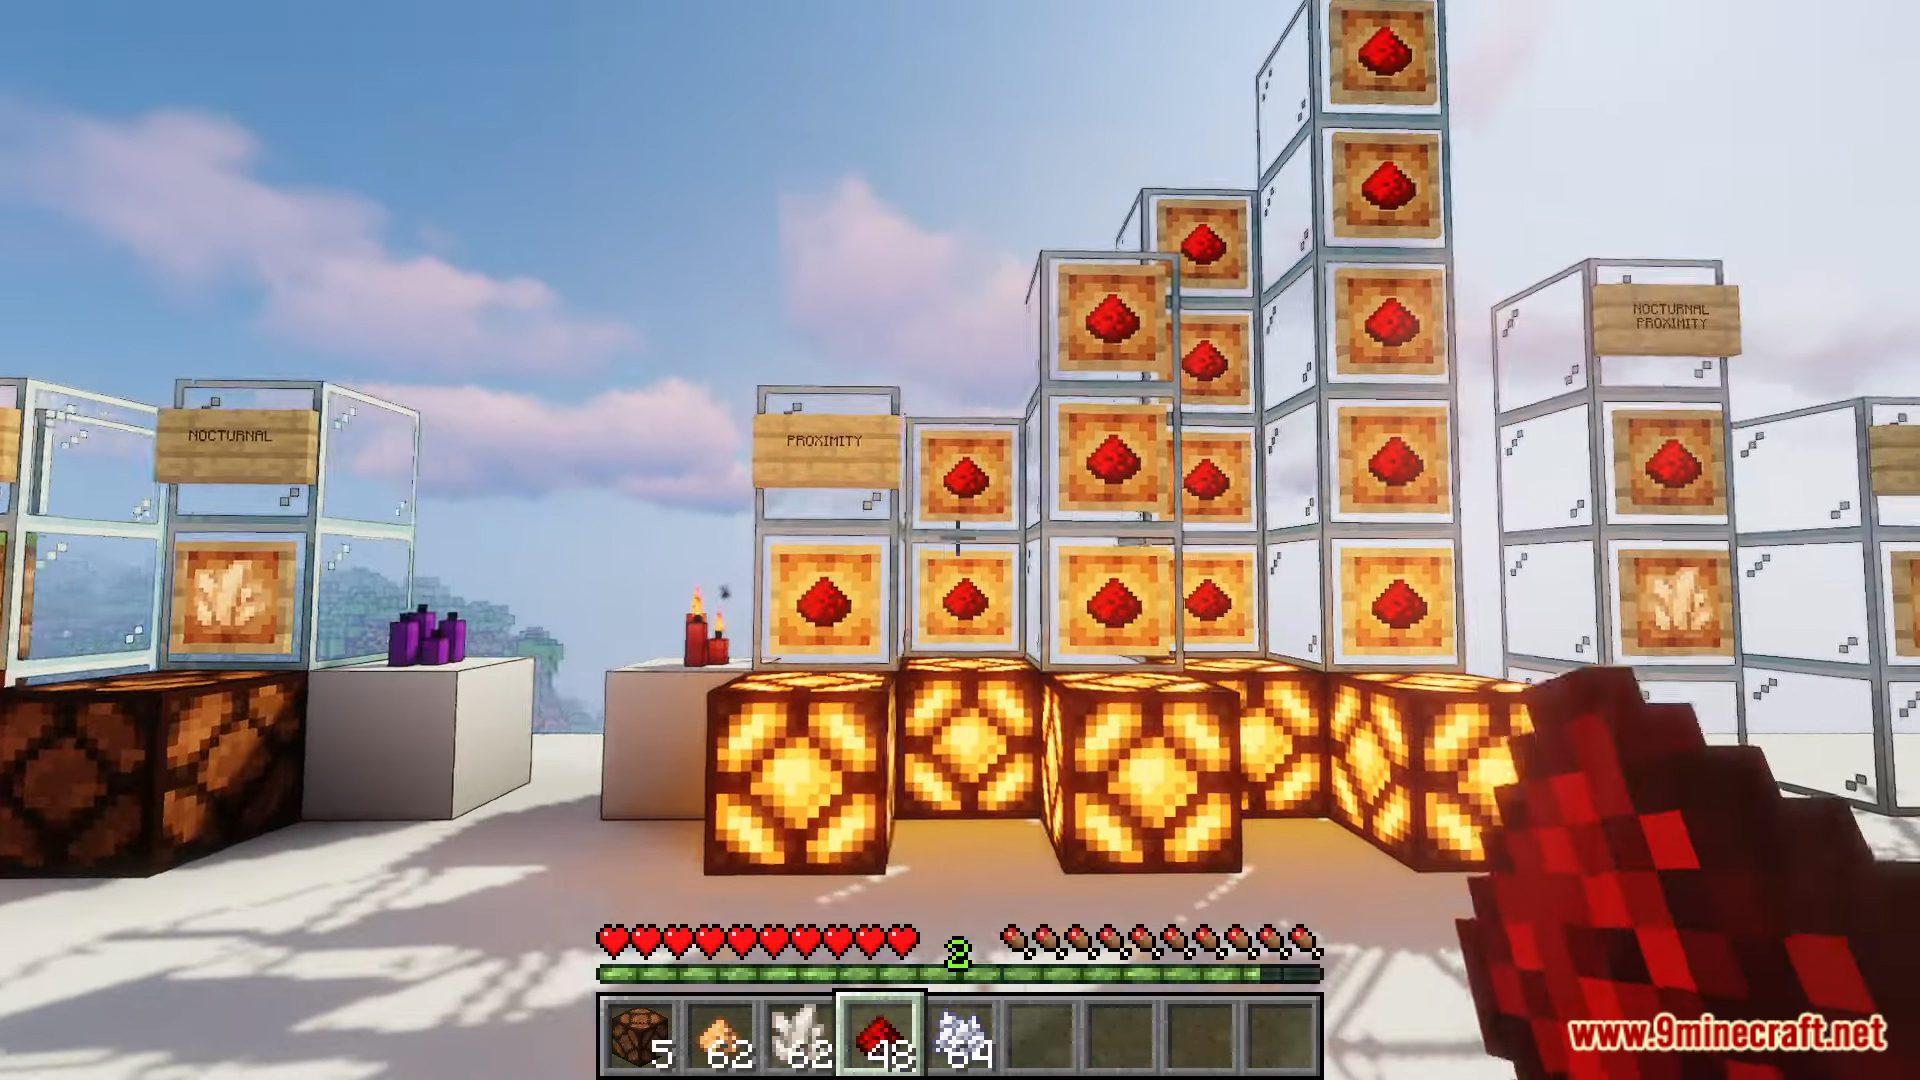 Automatic Lights Data Pack (1.19.4, 1.19.2) - Light Your Way! 4